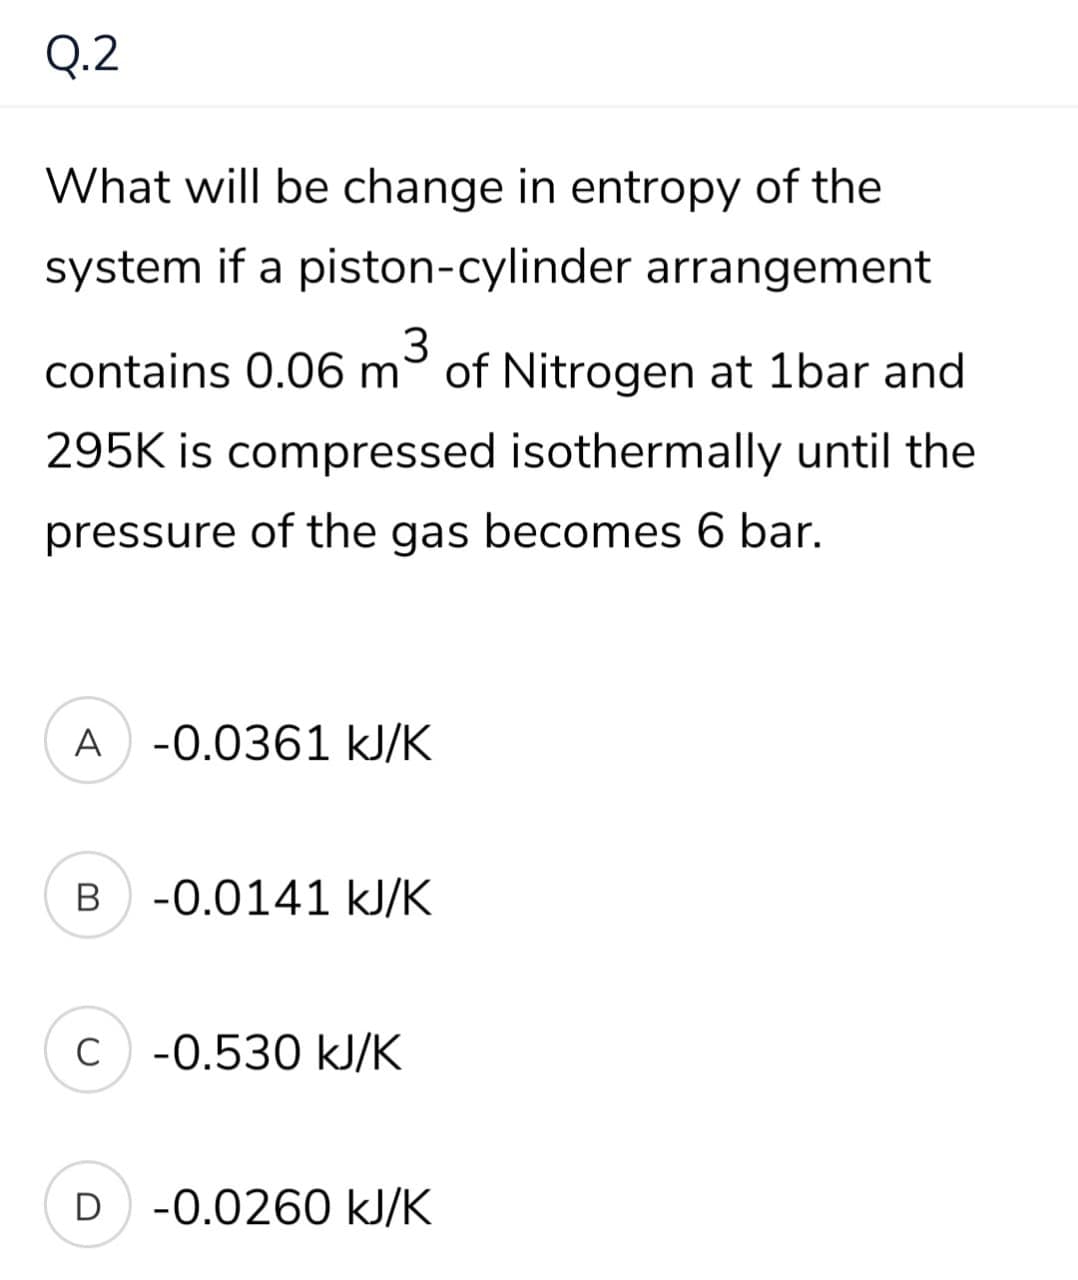 Q.2
What will be change in entropy of the
system if a piston-cylinder arrangement
contains 0.06 m° of Nitrogen at 1bar and
295K is compressed isothermally until the
pressure of the gas becomes 6 bar.
A -0.0361 kJ/K
B
-0.0141 kJ/K
C -0.530 kJ/K
D
-0.0260 kJ/K
